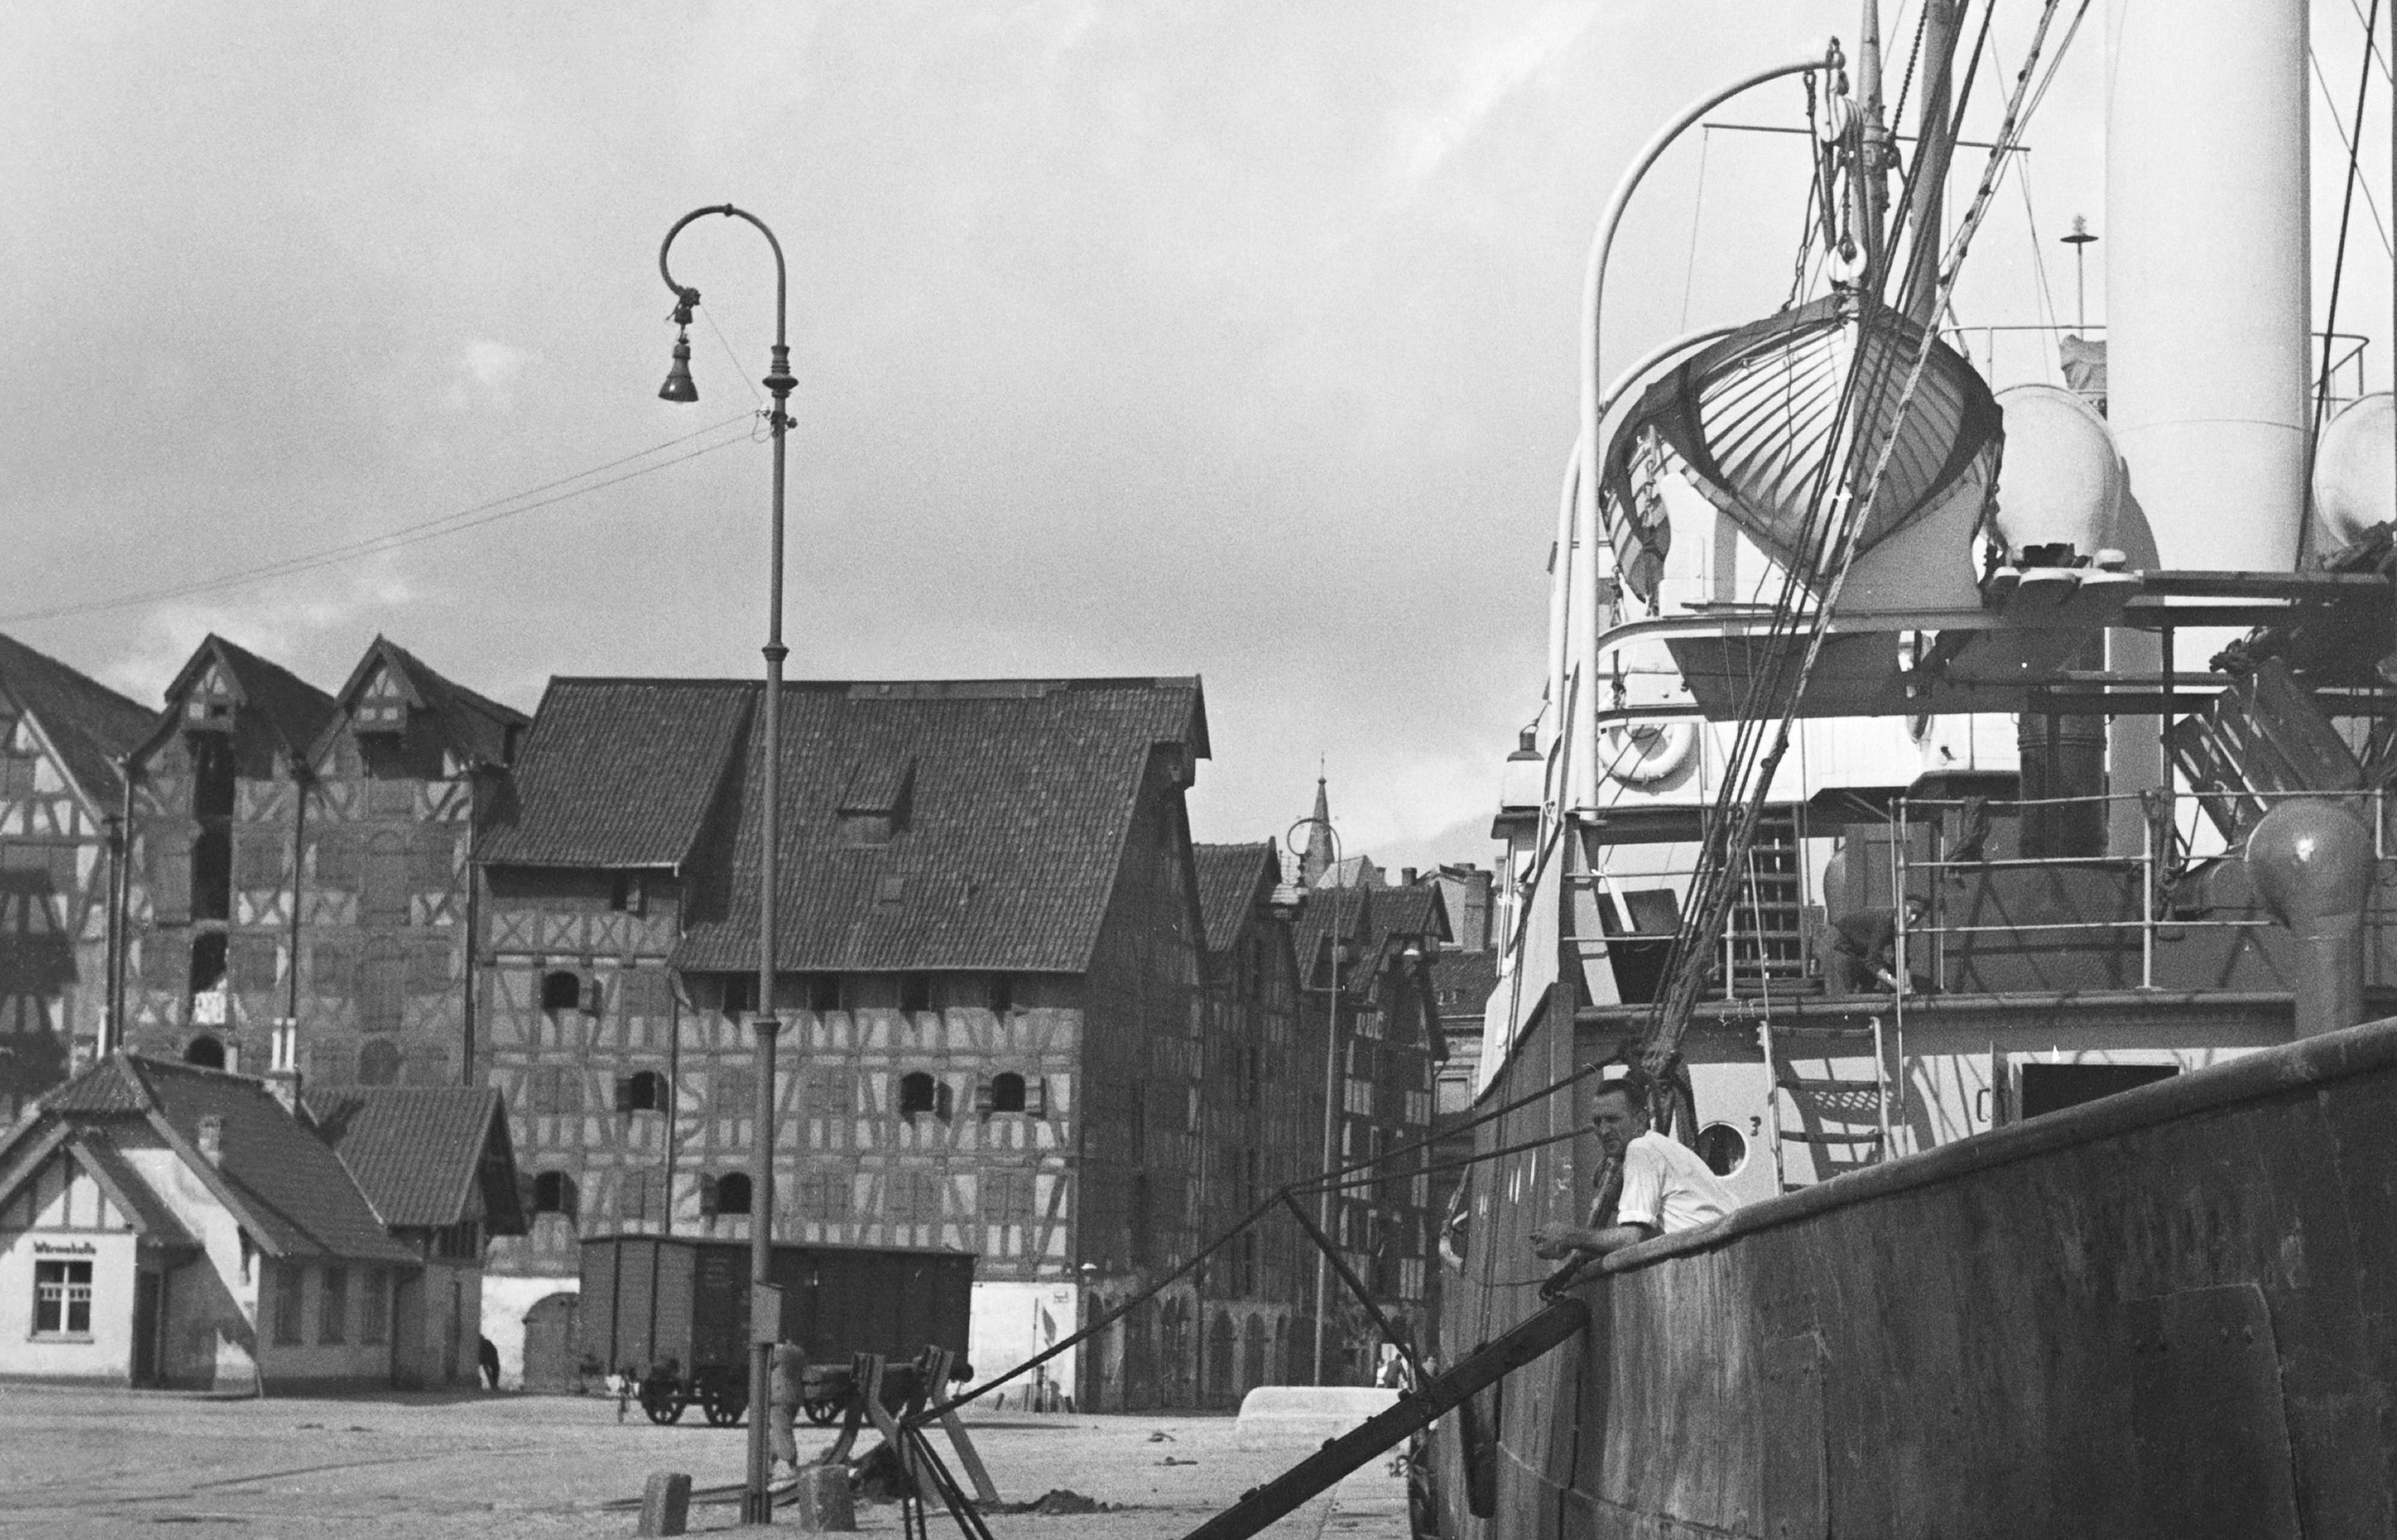 Ships at Koenigsberg harbor in East Prussia, Germany 1937 Printed Later - Photograph by Karl Heinrich Lämmel